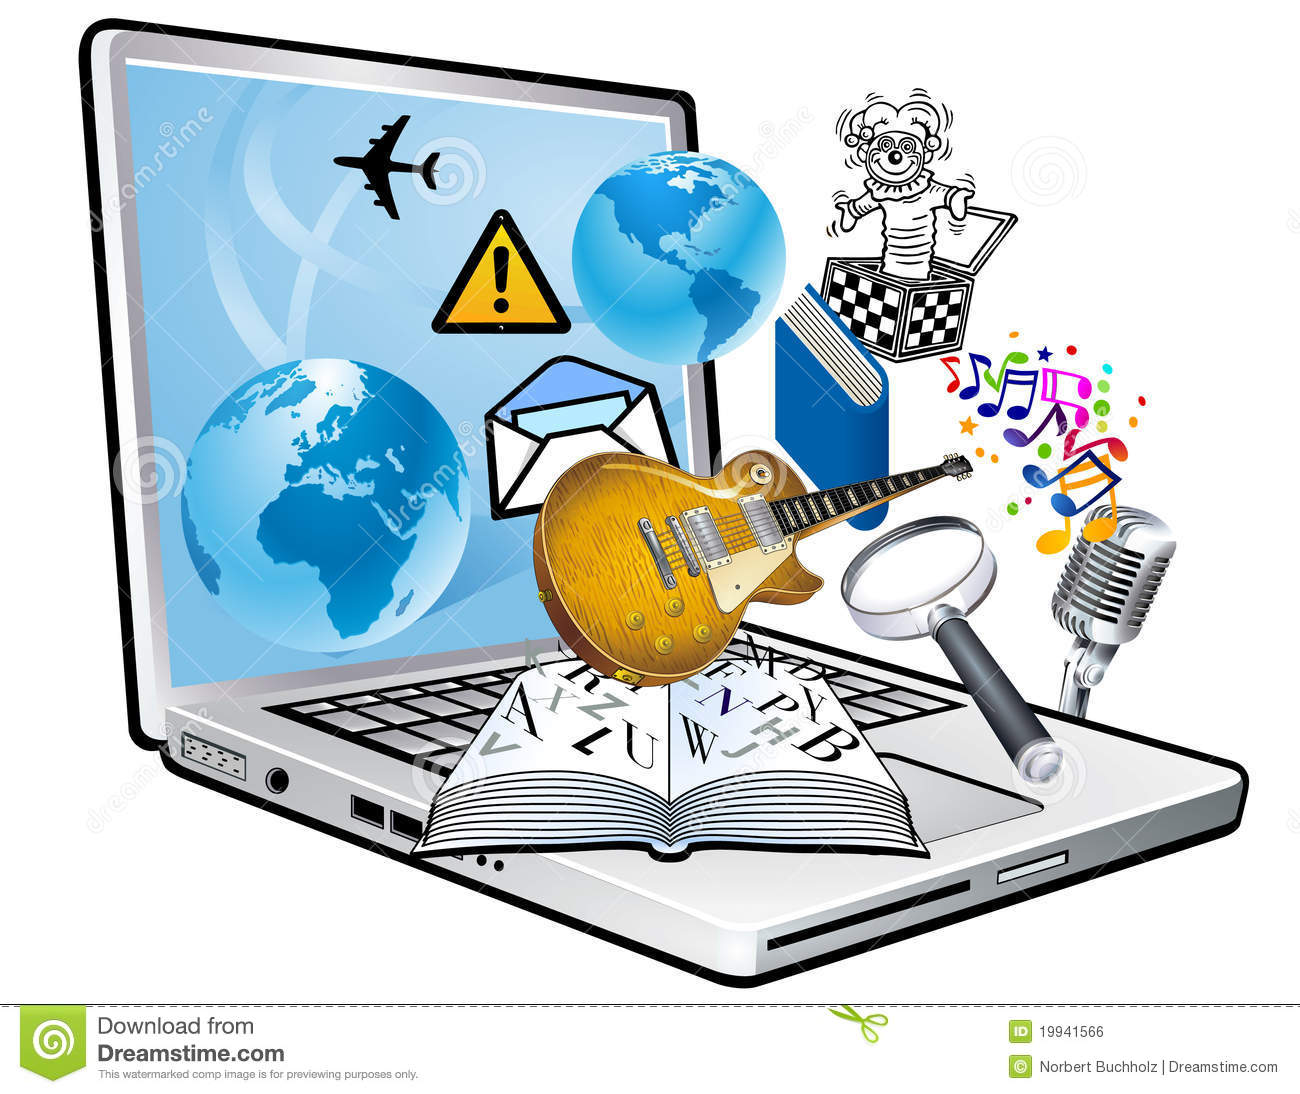 Information technology clipart.